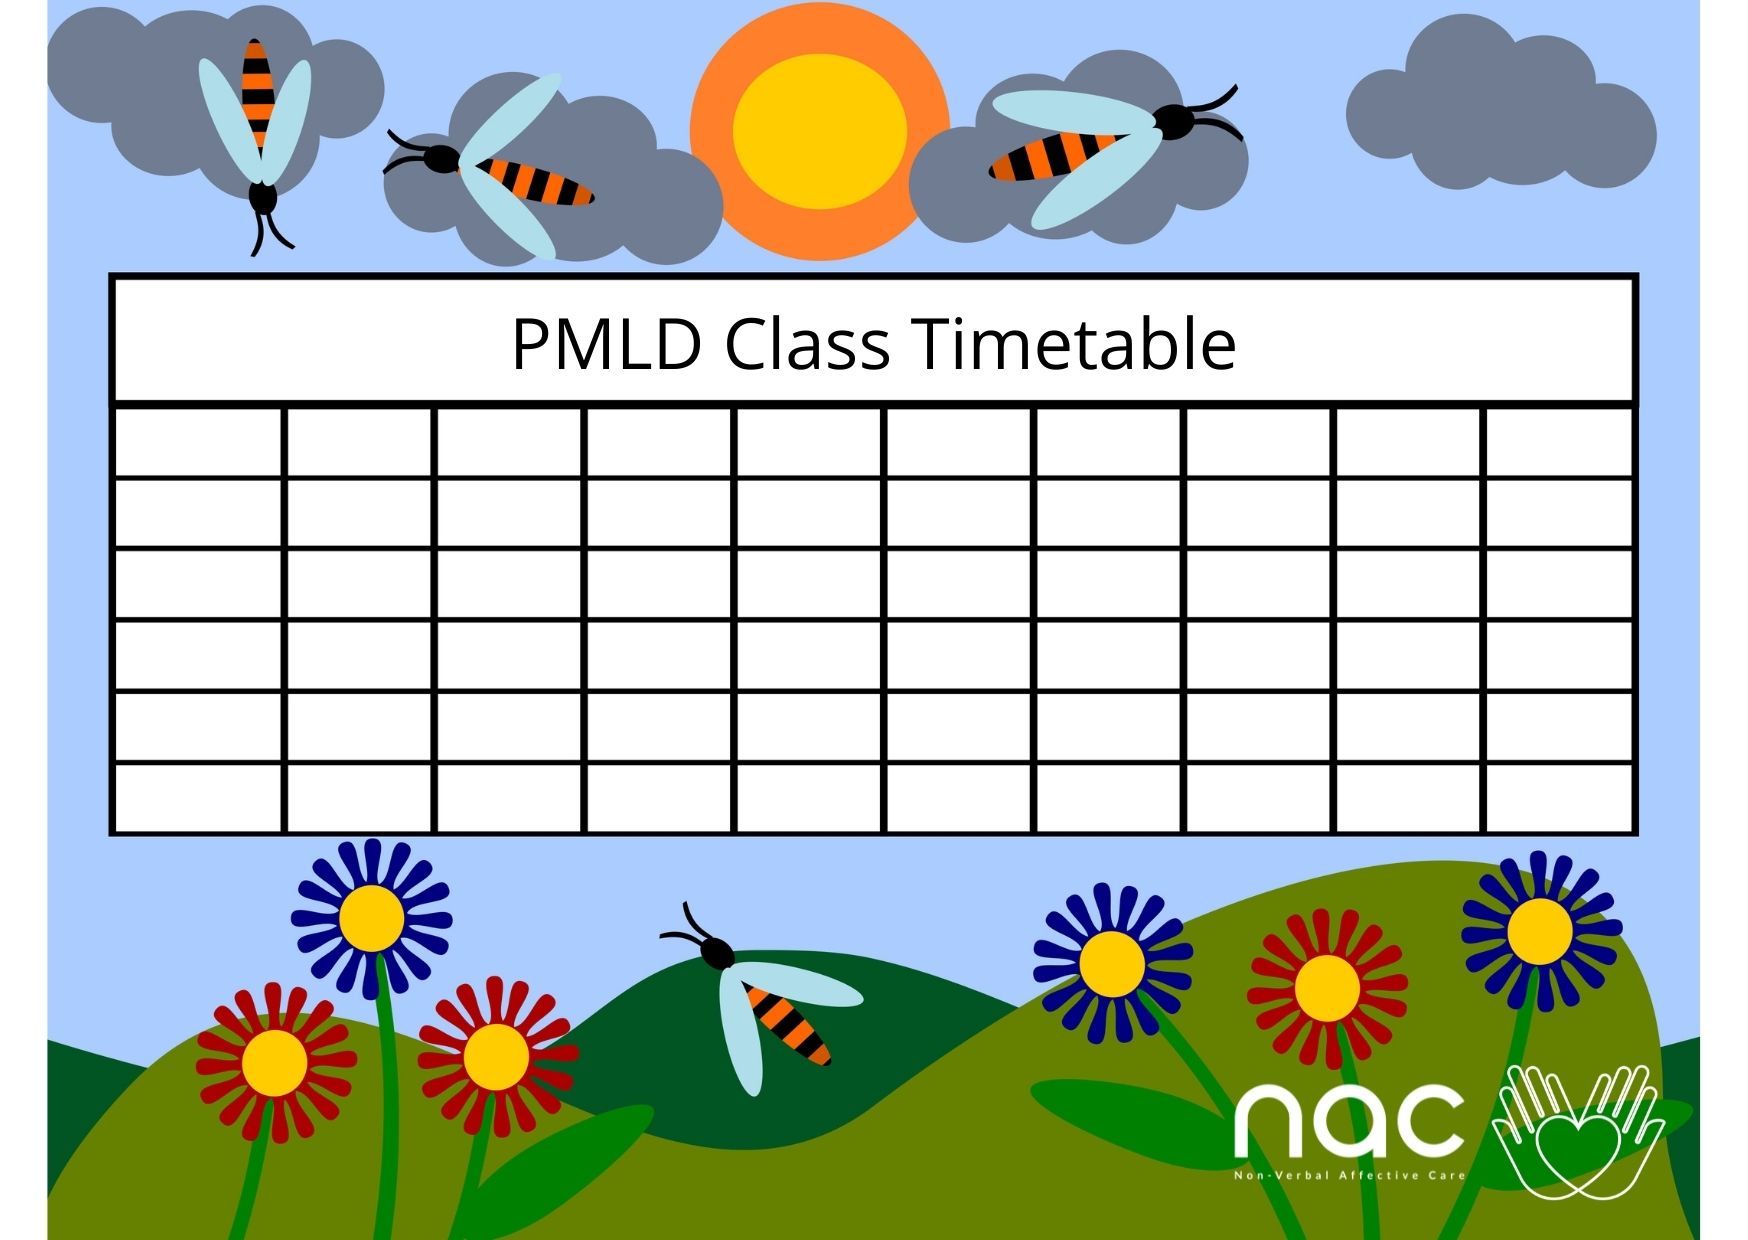 PMLD Class Timetable